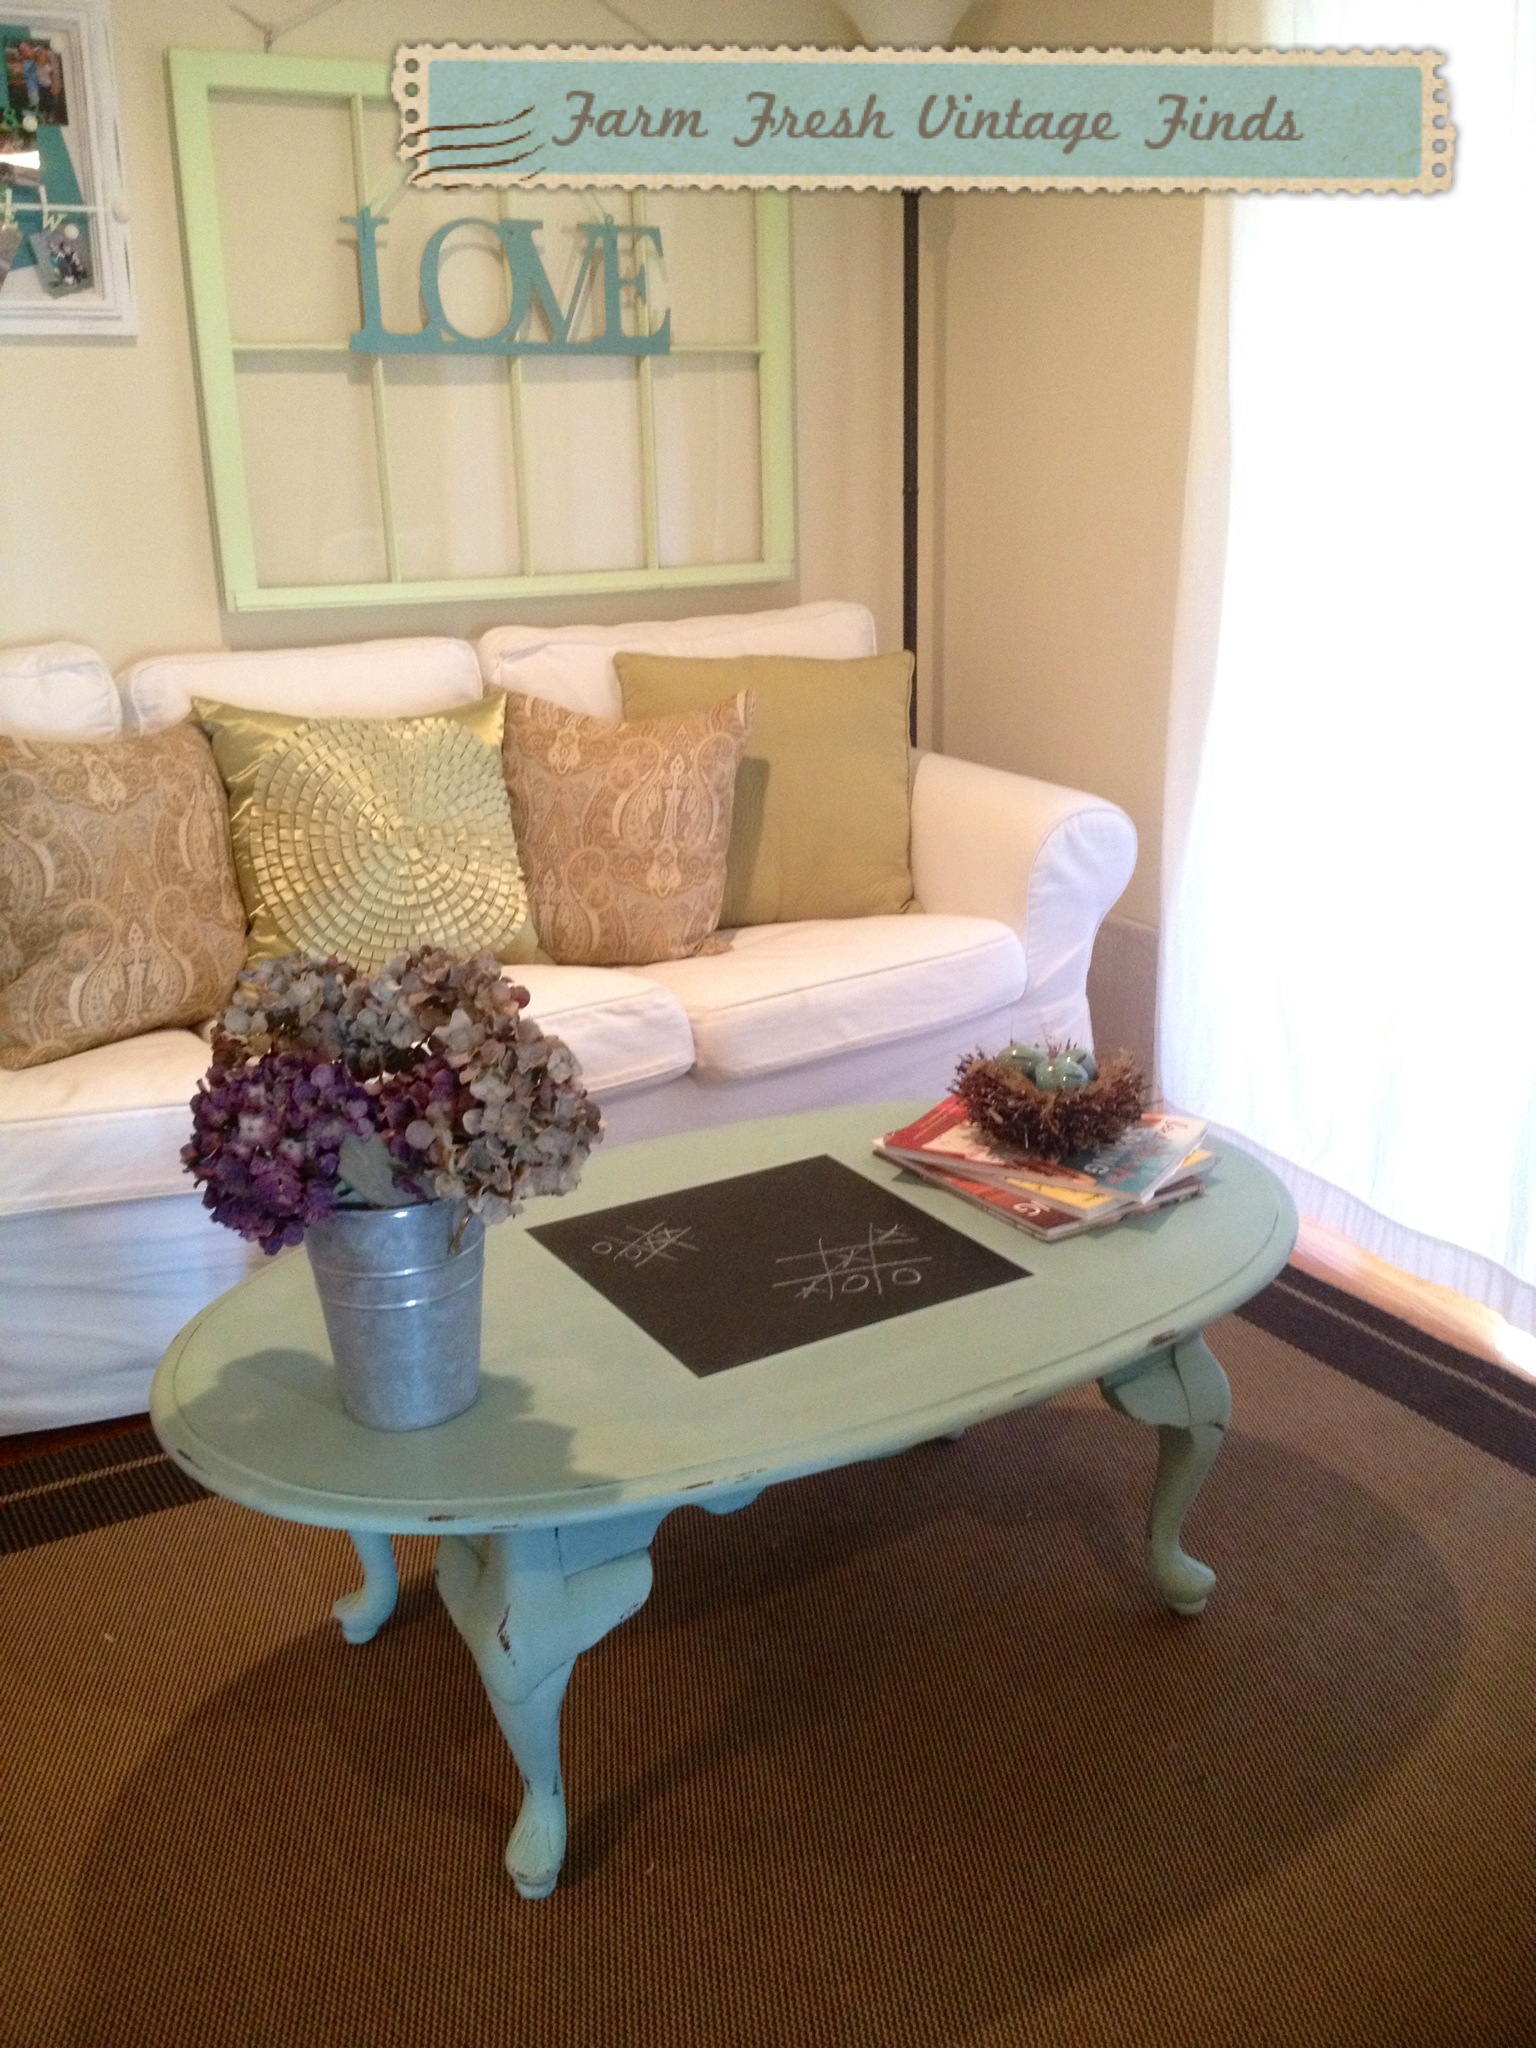 Coffee Table Makeover